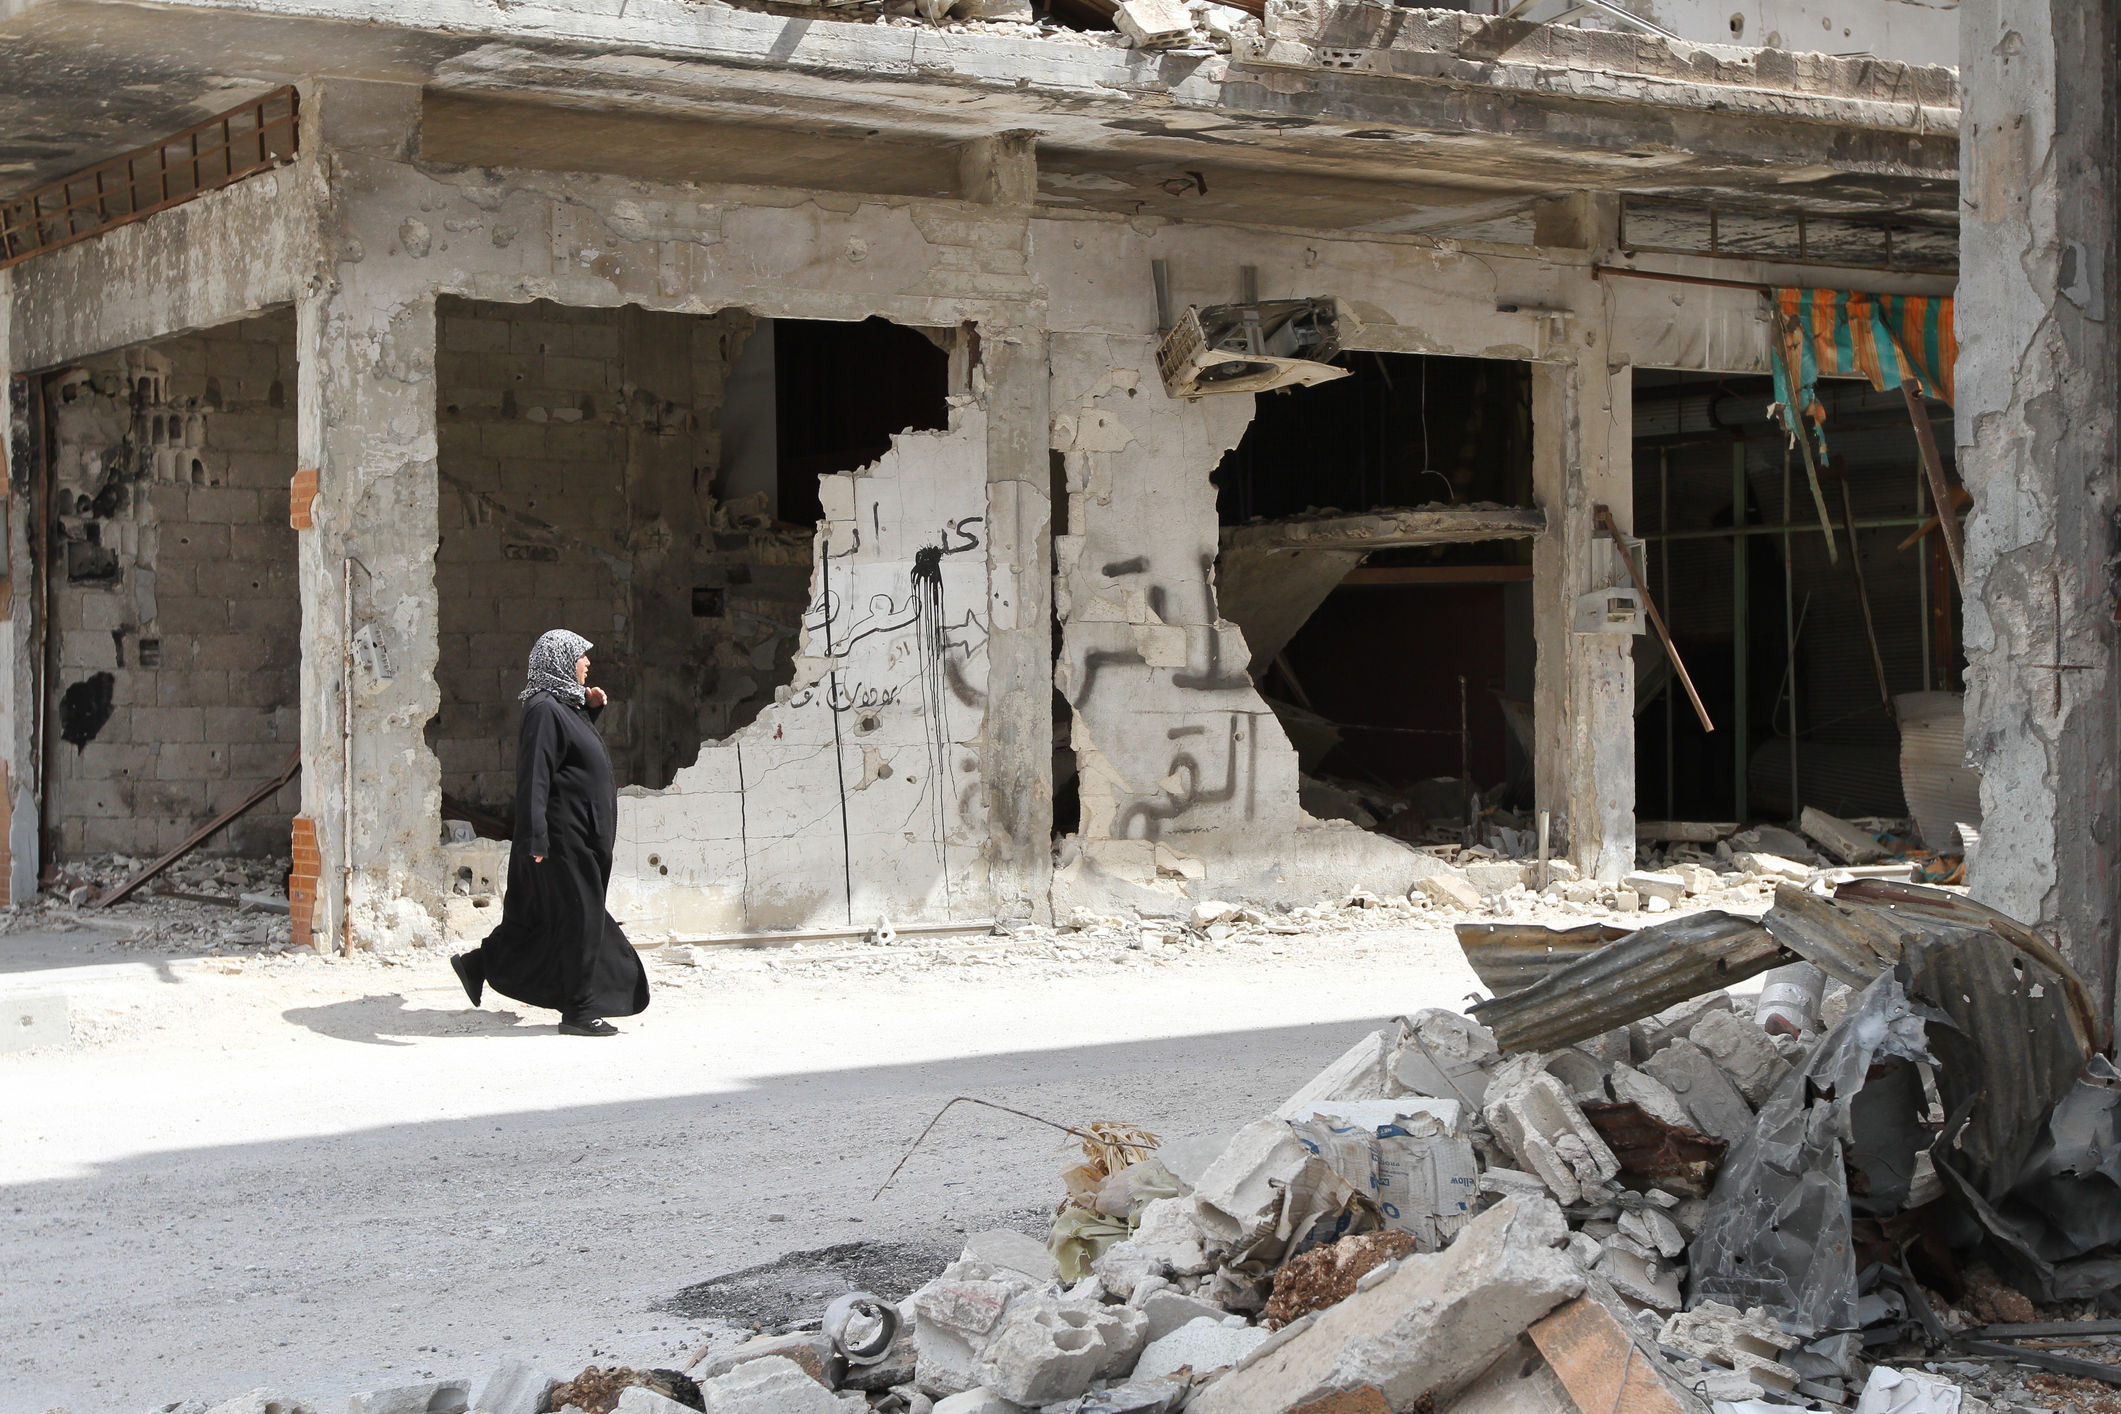 Homs, Syria - September 22, 2013: A woman walks near a house in the city of Homs destroyed in the fighting between the rebels of the Syrian National Army